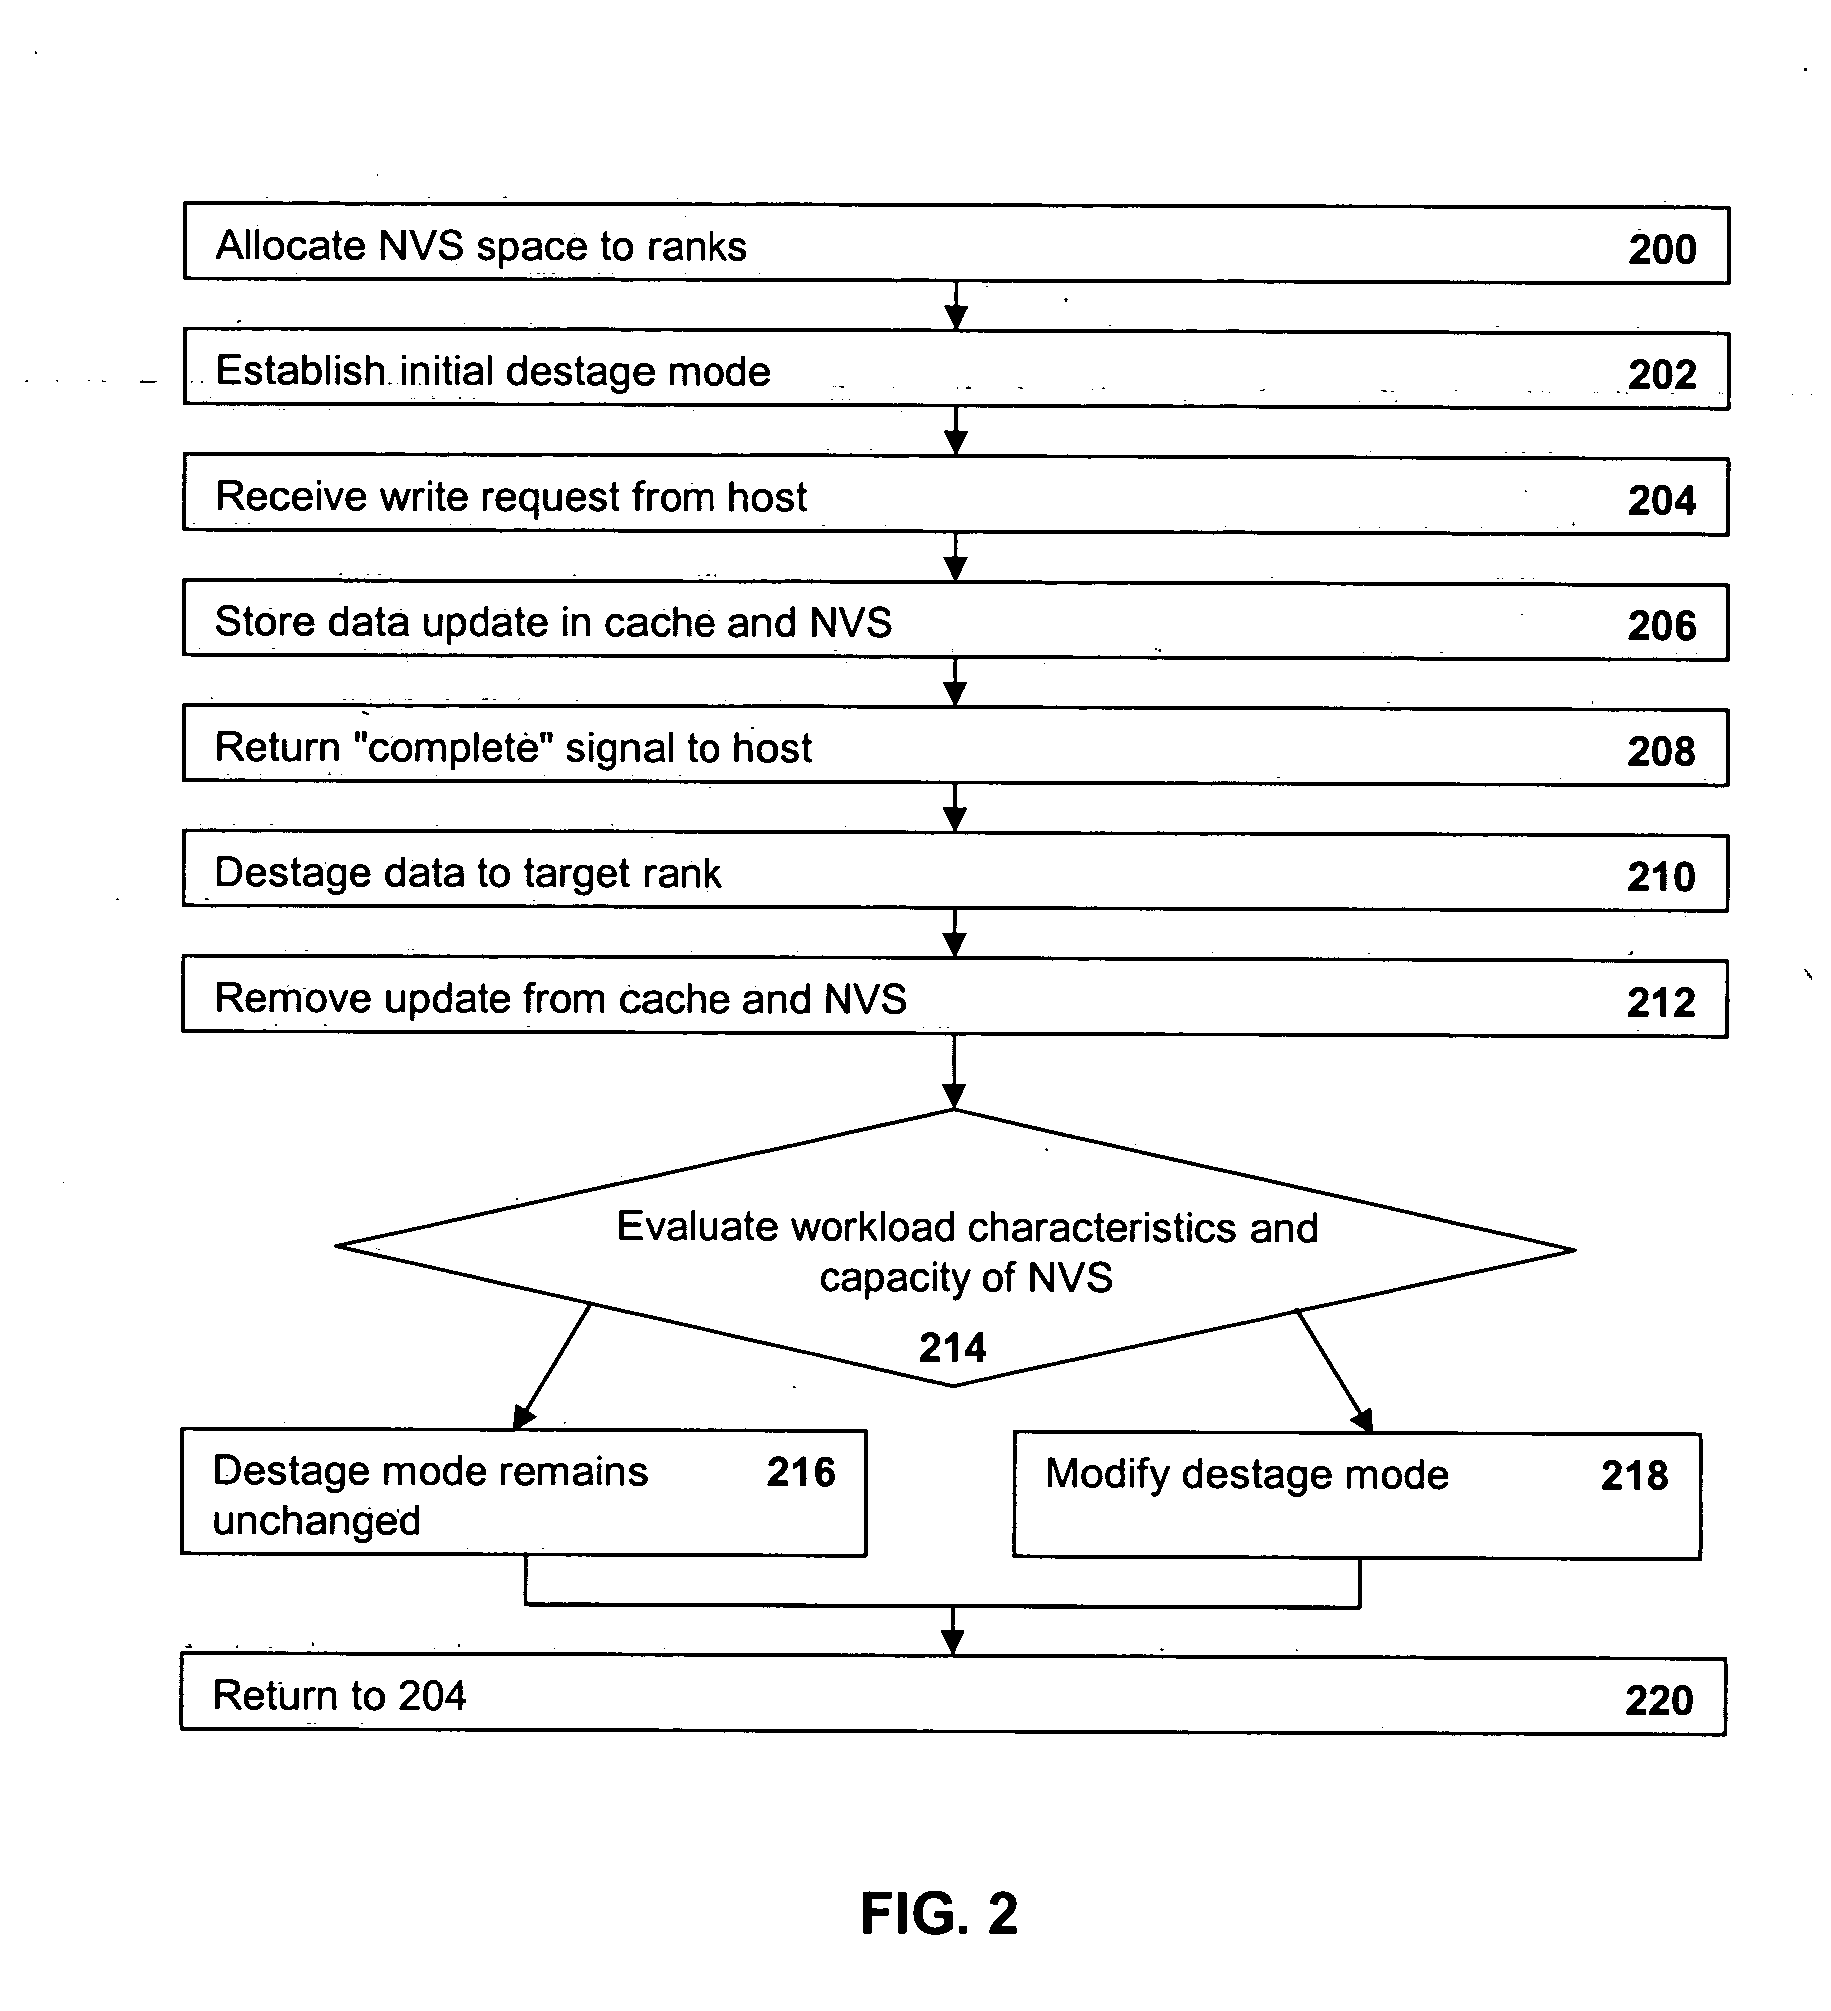 Increasing through-put of a storage controller by autonomically adjusting host delay